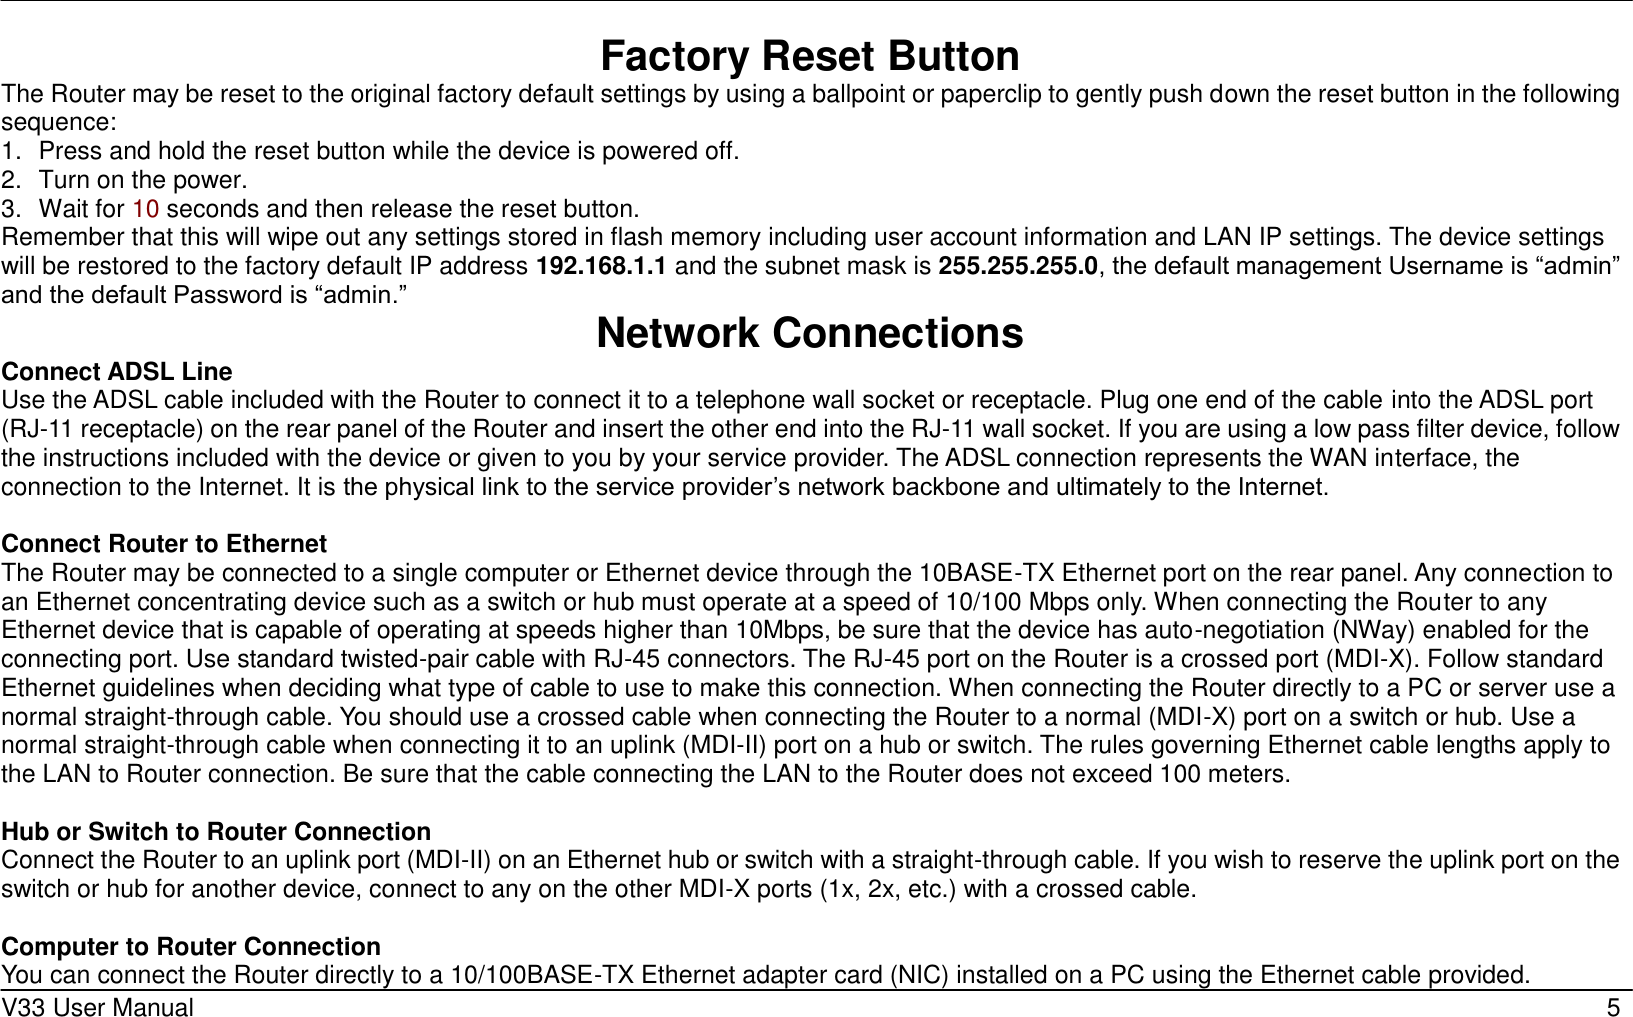     V33 User Manual   5 Factory Reset Button The Router may be reset to the original factory default settings by using a ballpoint or paperclip to gently push down the reset button in the following sequence:   1.  Press and hold the reset button while the device is powered off. 2.  Turn on the power. 3.  Wait for 10 seconds and then release the reset button.   Remember that this will wipe out any settings stored in flash memory including user account information and LAN IP settings. The device settings will be restored to the factory default IP address 192.168.1.1 and the subnet mask is 255.255.255.0, the default management Username is “admin” and the default Password is “admin.” Network Connections   Connect ADSL Line Use the ADSL cable included with the Router to connect it to a telephone wall socket or receptacle. Plug one end of the cable into the ADSL port (RJ-11 receptacle) on the rear panel of the Router and insert the other end into the RJ-11 wall socket. If you are using a low pass filter device, follow the instructions included with the device or given to you by your service provider. The ADSL connection represents the WAN interface, the connection to the Internet. It is the physical link to the service provider’s network backbone and ultimately to the Internet.    Connect Router to Ethernet   The Router may be connected to a single computer or Ethernet device through the 10BASE-TX Ethernet port on the rear panel. Any connection to an Ethernet concentrating device such as a switch or hub must operate at a speed of 10/100 Mbps only. When connecting the Router to any Ethernet device that is capable of operating at speeds higher than 10Mbps, be sure that the device has auto-negotiation (NWay) enabled for the connecting port. Use standard twisted-pair cable with RJ-45 connectors. The RJ-45 port on the Router is a crossed port (MDI-X). Follow standard Ethernet guidelines when deciding what type of cable to use to make this connection. When connecting the Router directly to a PC or server use a normal straight-through cable. You should use a crossed cable when connecting the Router to a normal (MDI-X) port on a switch or hub. Use a normal straight-through cable when connecting it to an uplink (MDI-II) port on a hub or switch. The rules governing Ethernet cable lengths apply to the LAN to Router connection. Be sure that the cable connecting the LAN to the Router does not exceed 100 meters.  Hub or Switch to Router Connection Connect the Router to an uplink port (MDI-II) on an Ethernet hub or switch with a straight-through cable. If you wish to reserve the uplink port on the switch or hub for another device, connect to any on the other MDI-X ports (1x, 2x, etc.) with a crossed cable.  Computer to Router Connection You can connect the Router directly to a 10/100BASE-TX Ethernet adapter card (NIC) installed on a PC using the Ethernet cable provided.